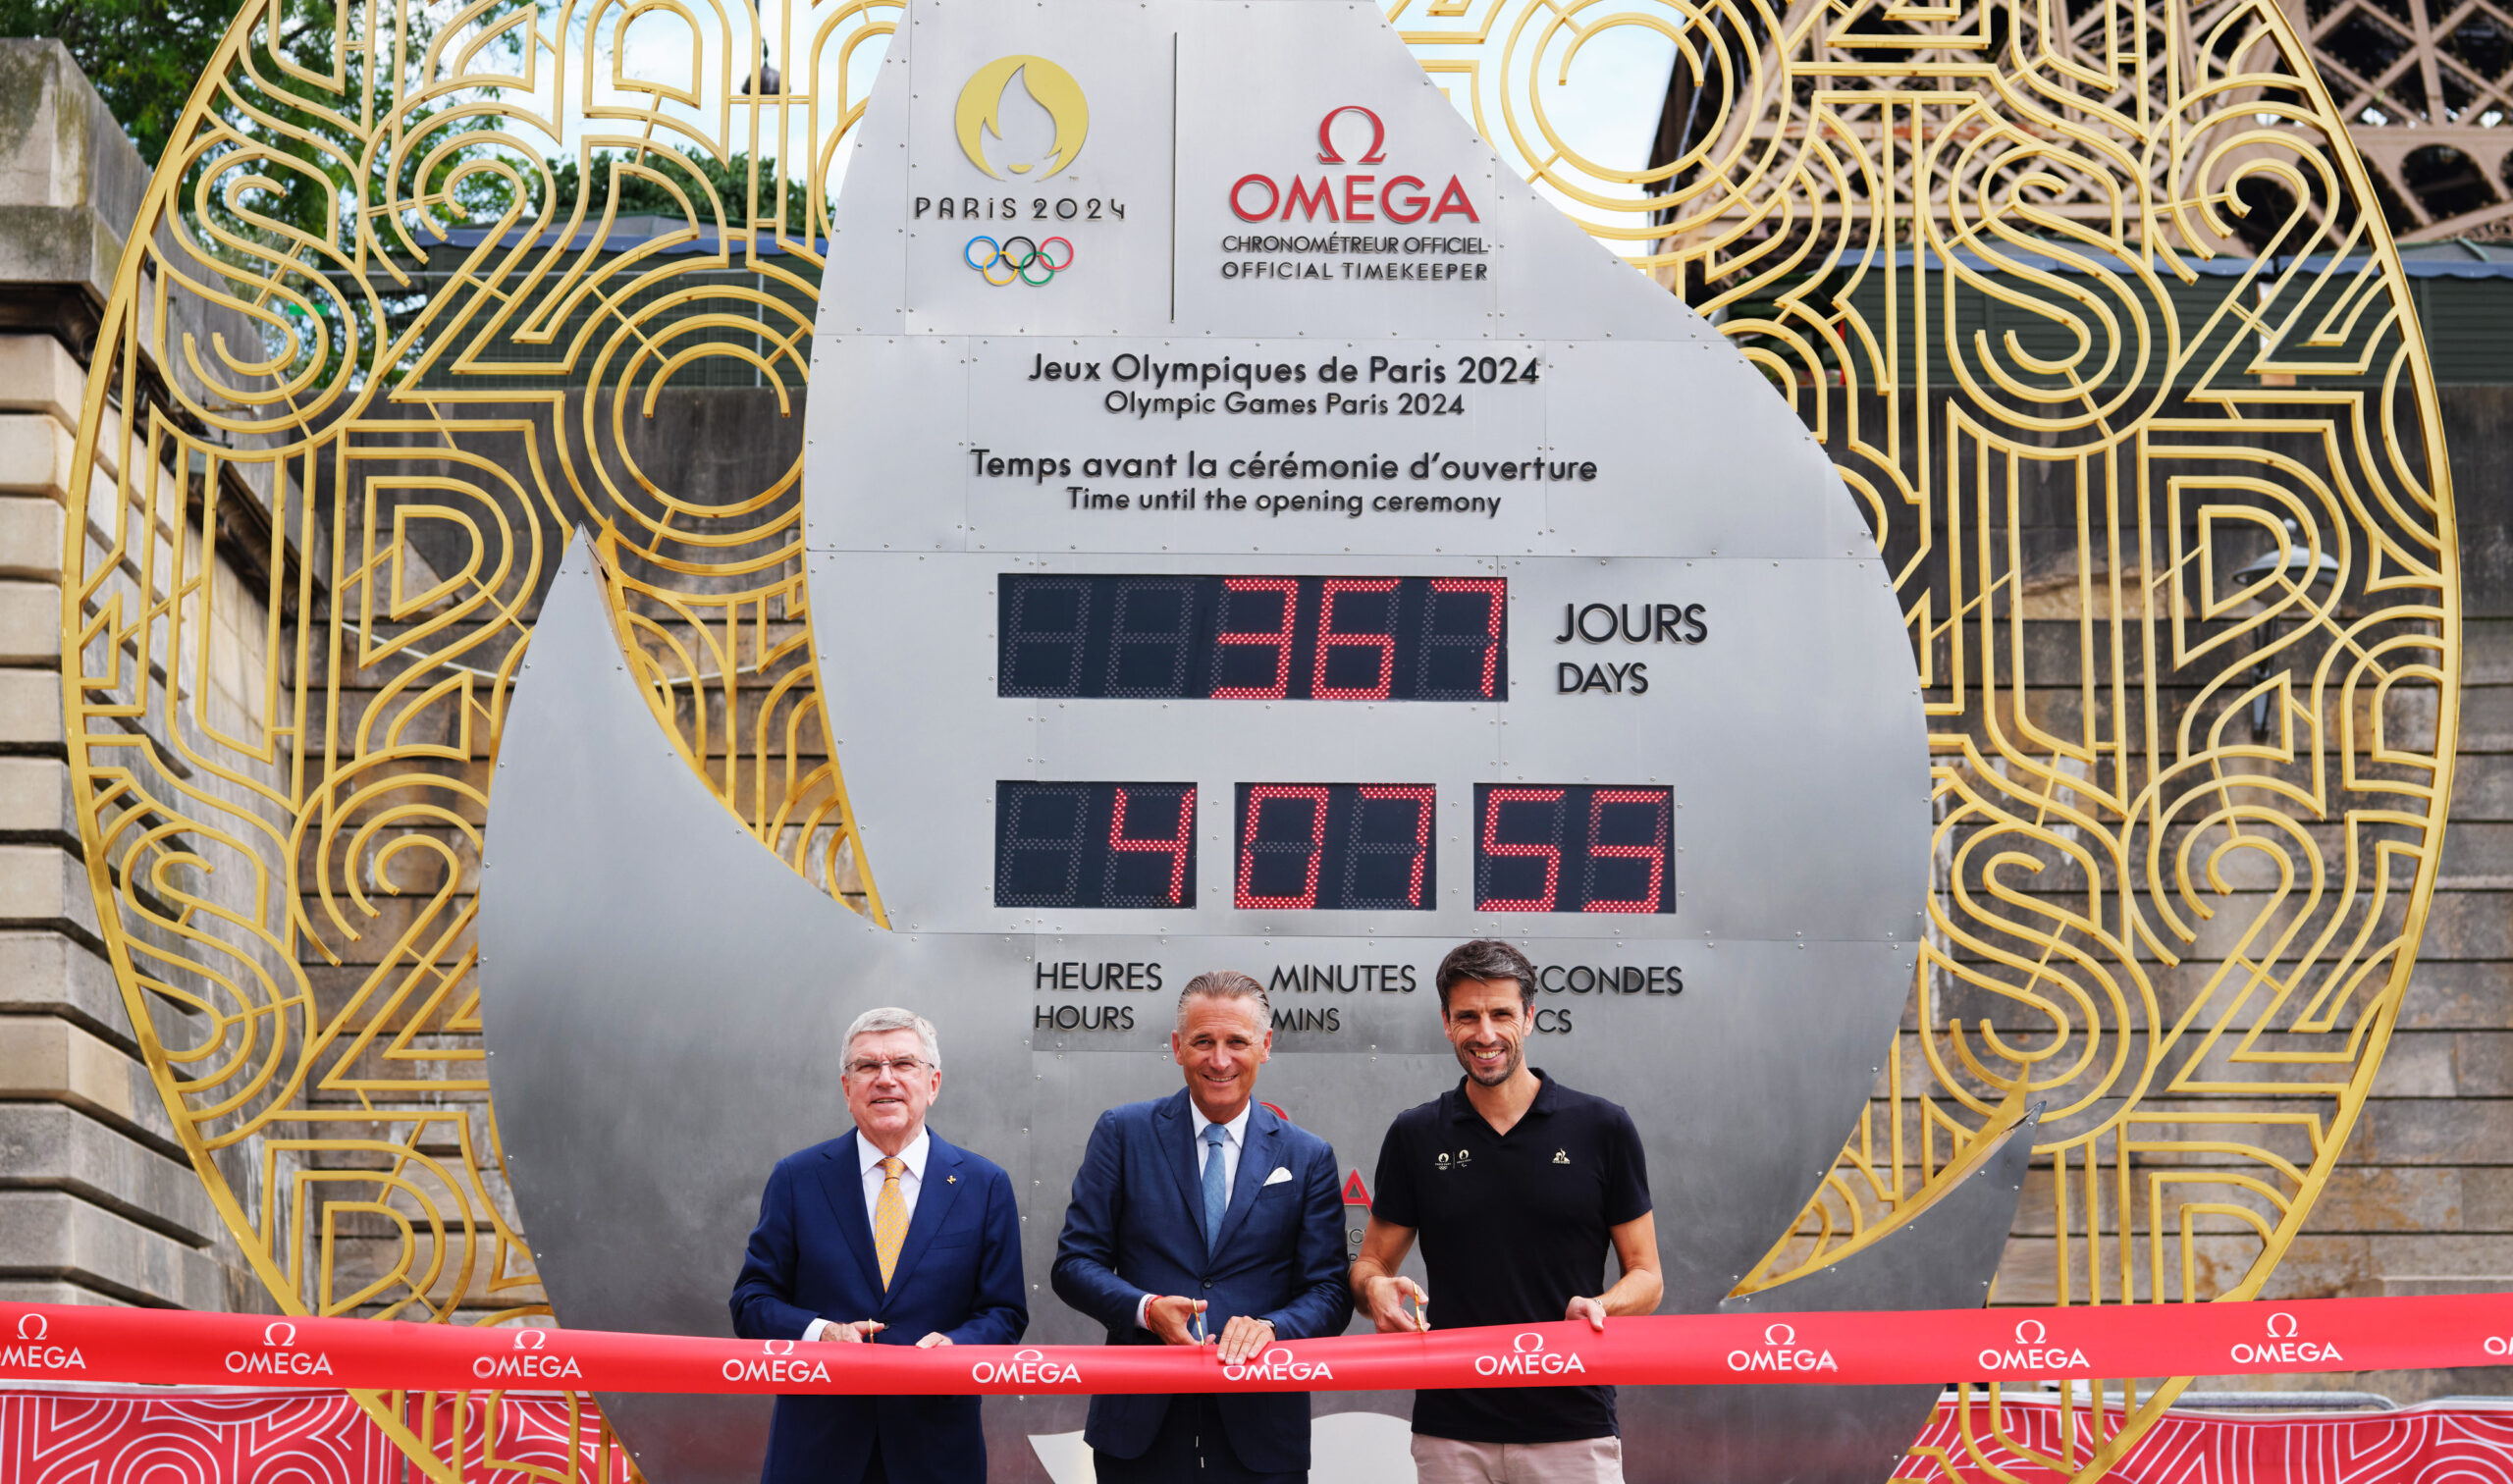 Omega officially begins the countdownd to the olympic games paris 2024 4 5 scaled